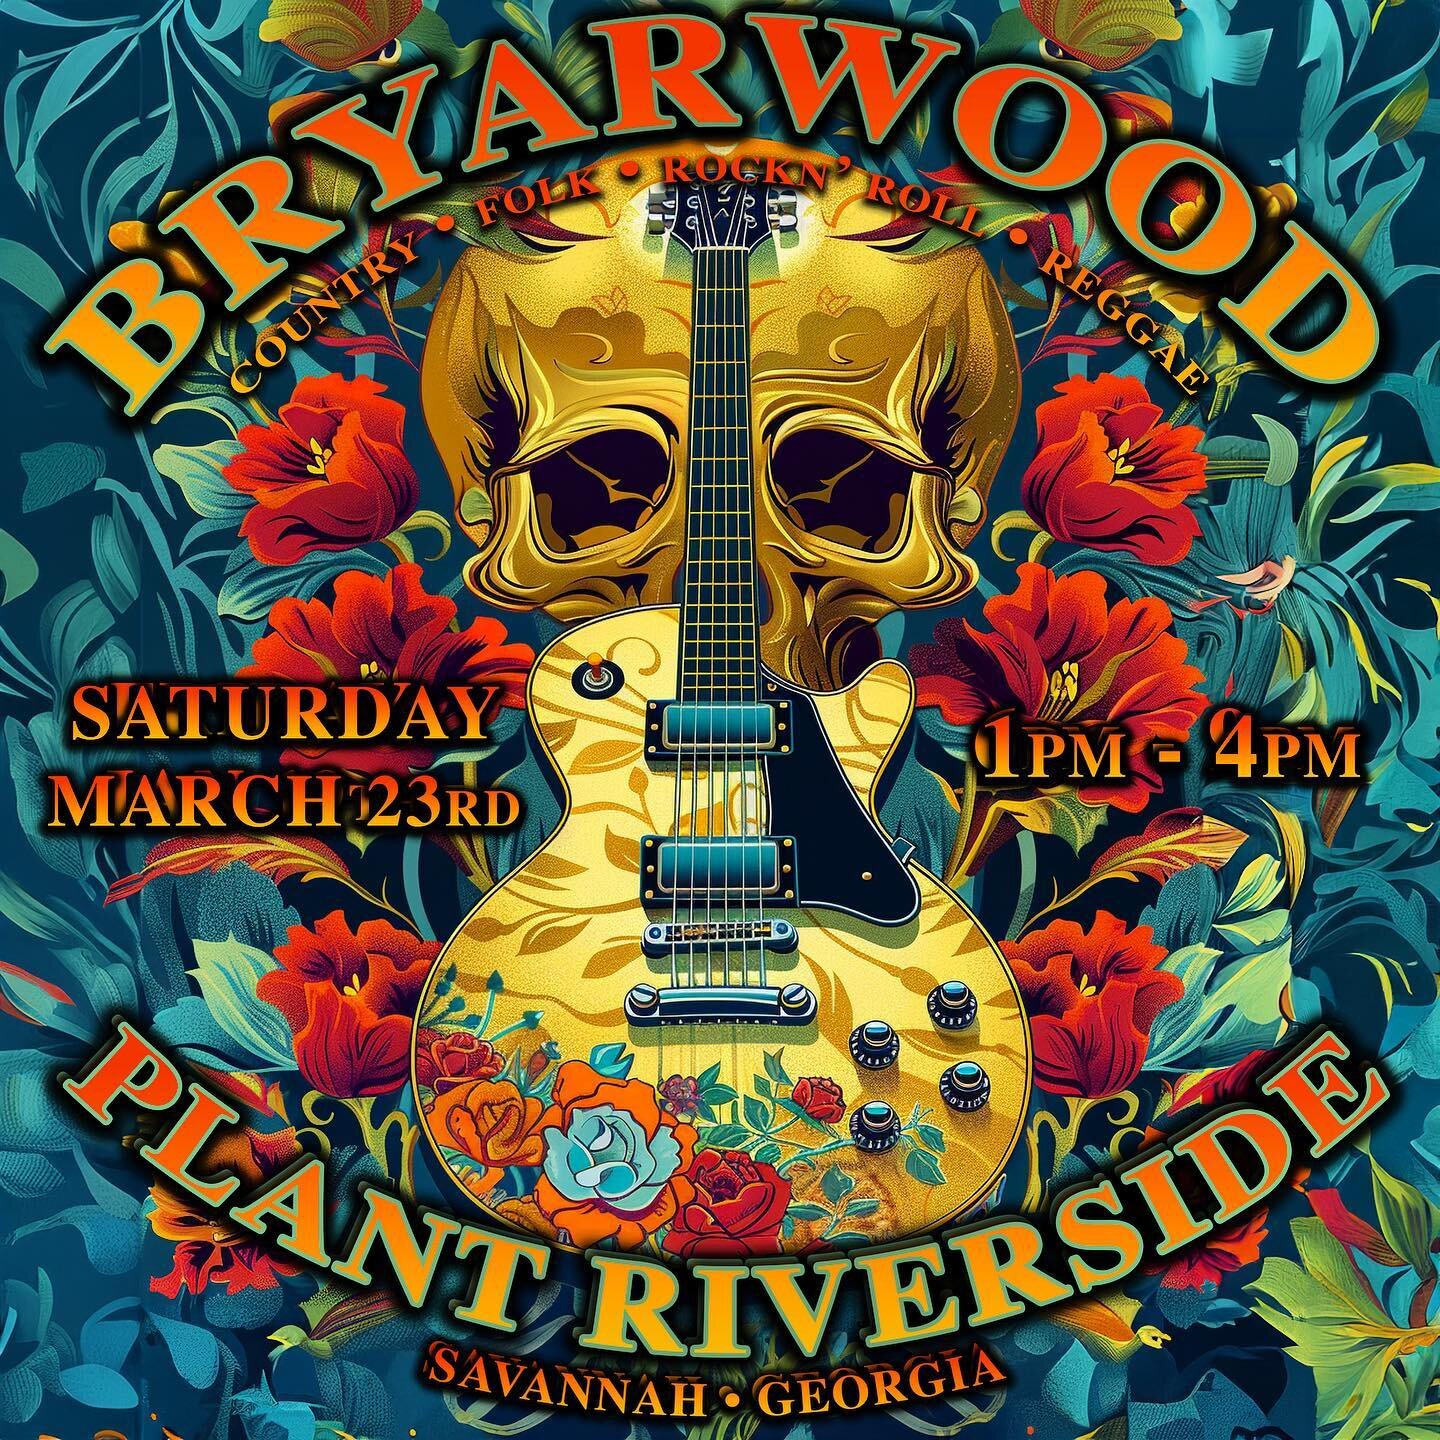 Catch Bryarwood live on the riverfront @plantriversidedistrict on Saturday from 1-4pm playing a mix of country music, folk, rock&rsquo;n roll and reggae hits from across the decades. #savannah #savannahgeorgia #art912 #concert #livemusic #coverband #